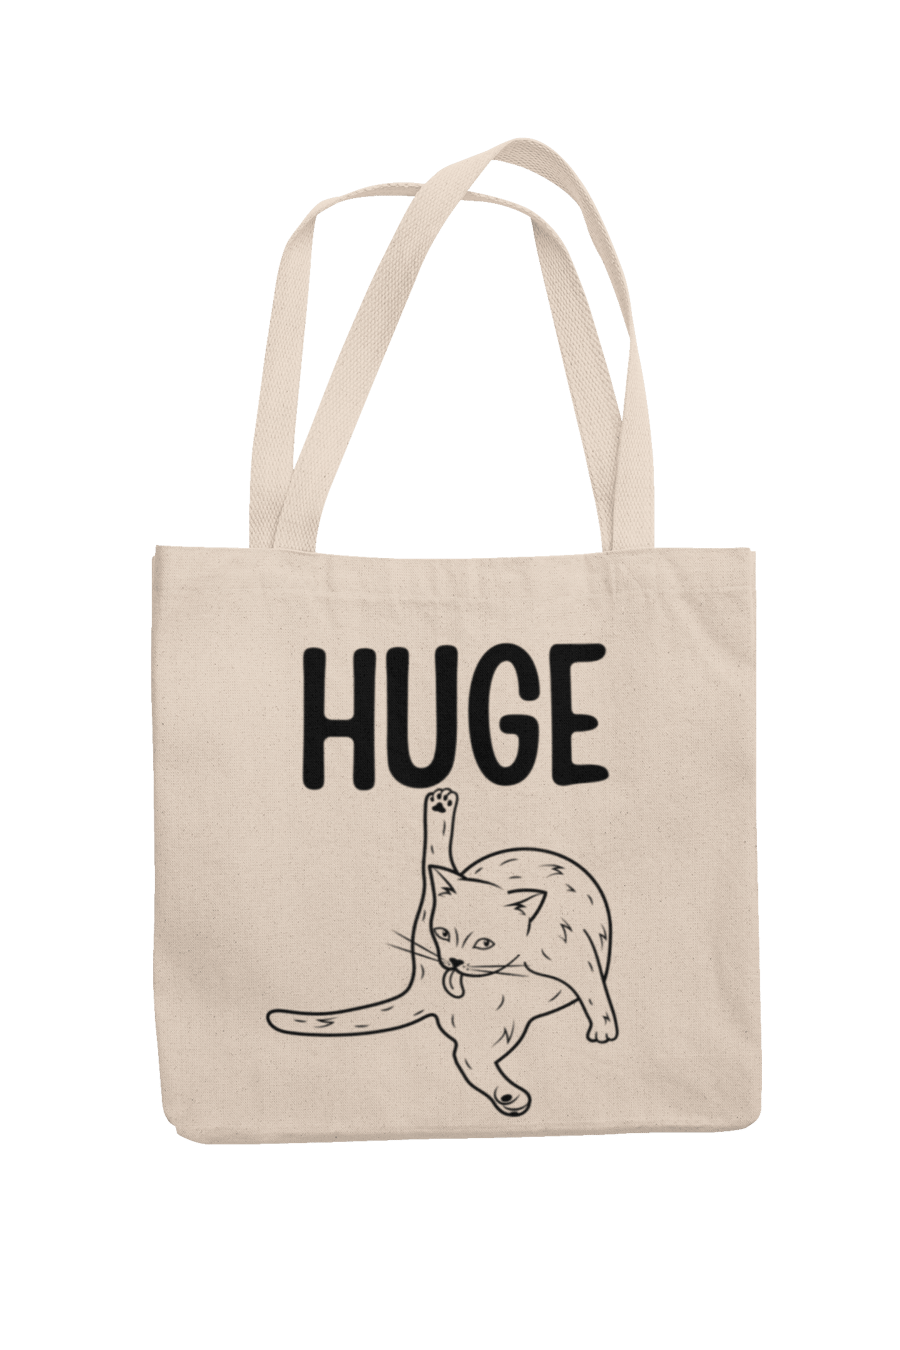 Huge ( Pussy Cat ) Novelty Rude Tote Bag